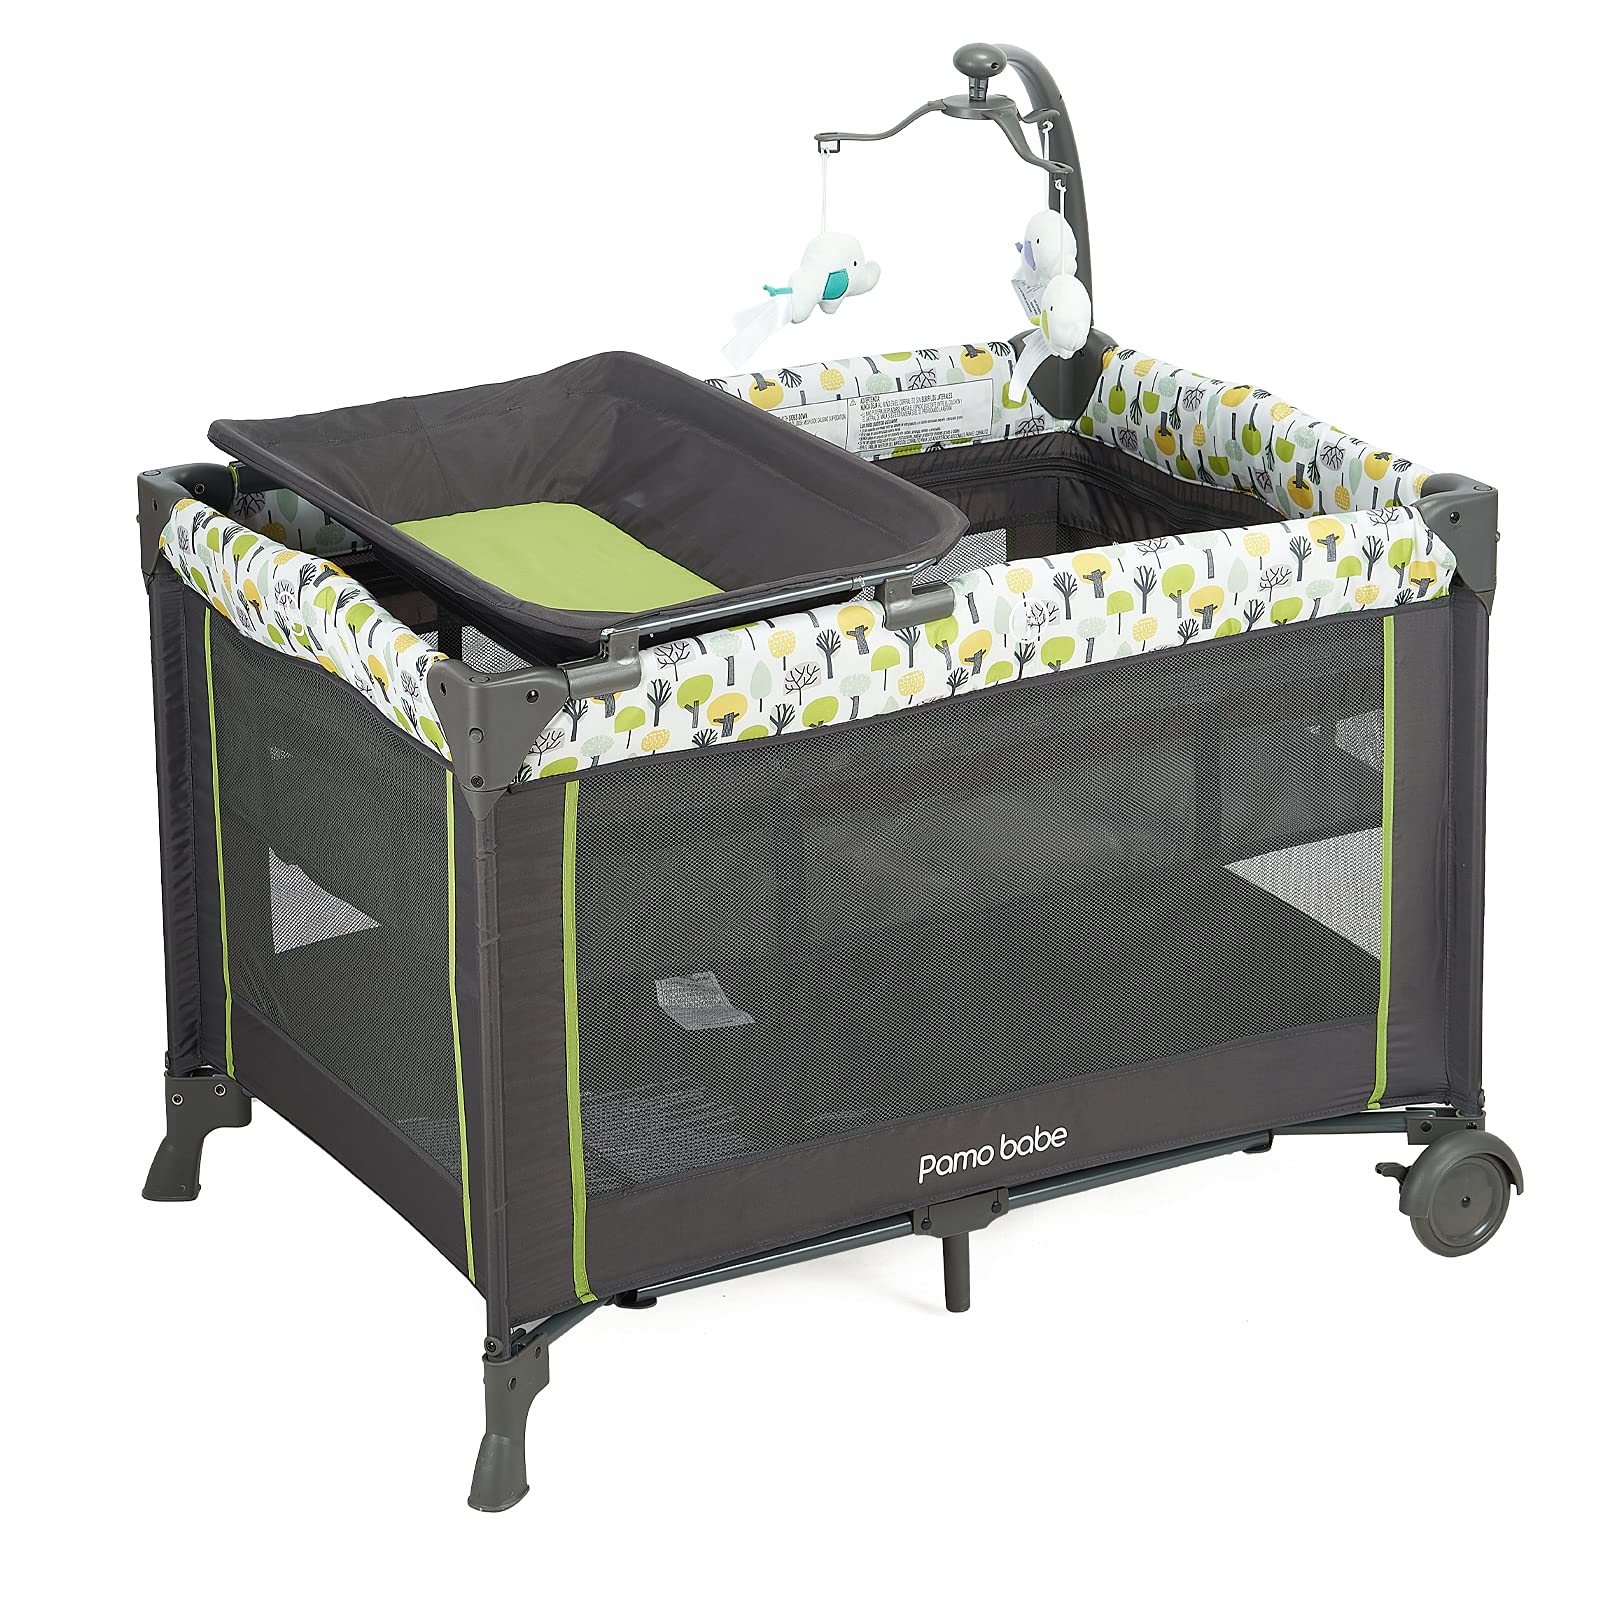 Pamo Babe Deluxe Nursery Center,Portable Playard with Comfortable Mattress,Changing Table and Cute Toys (Green)